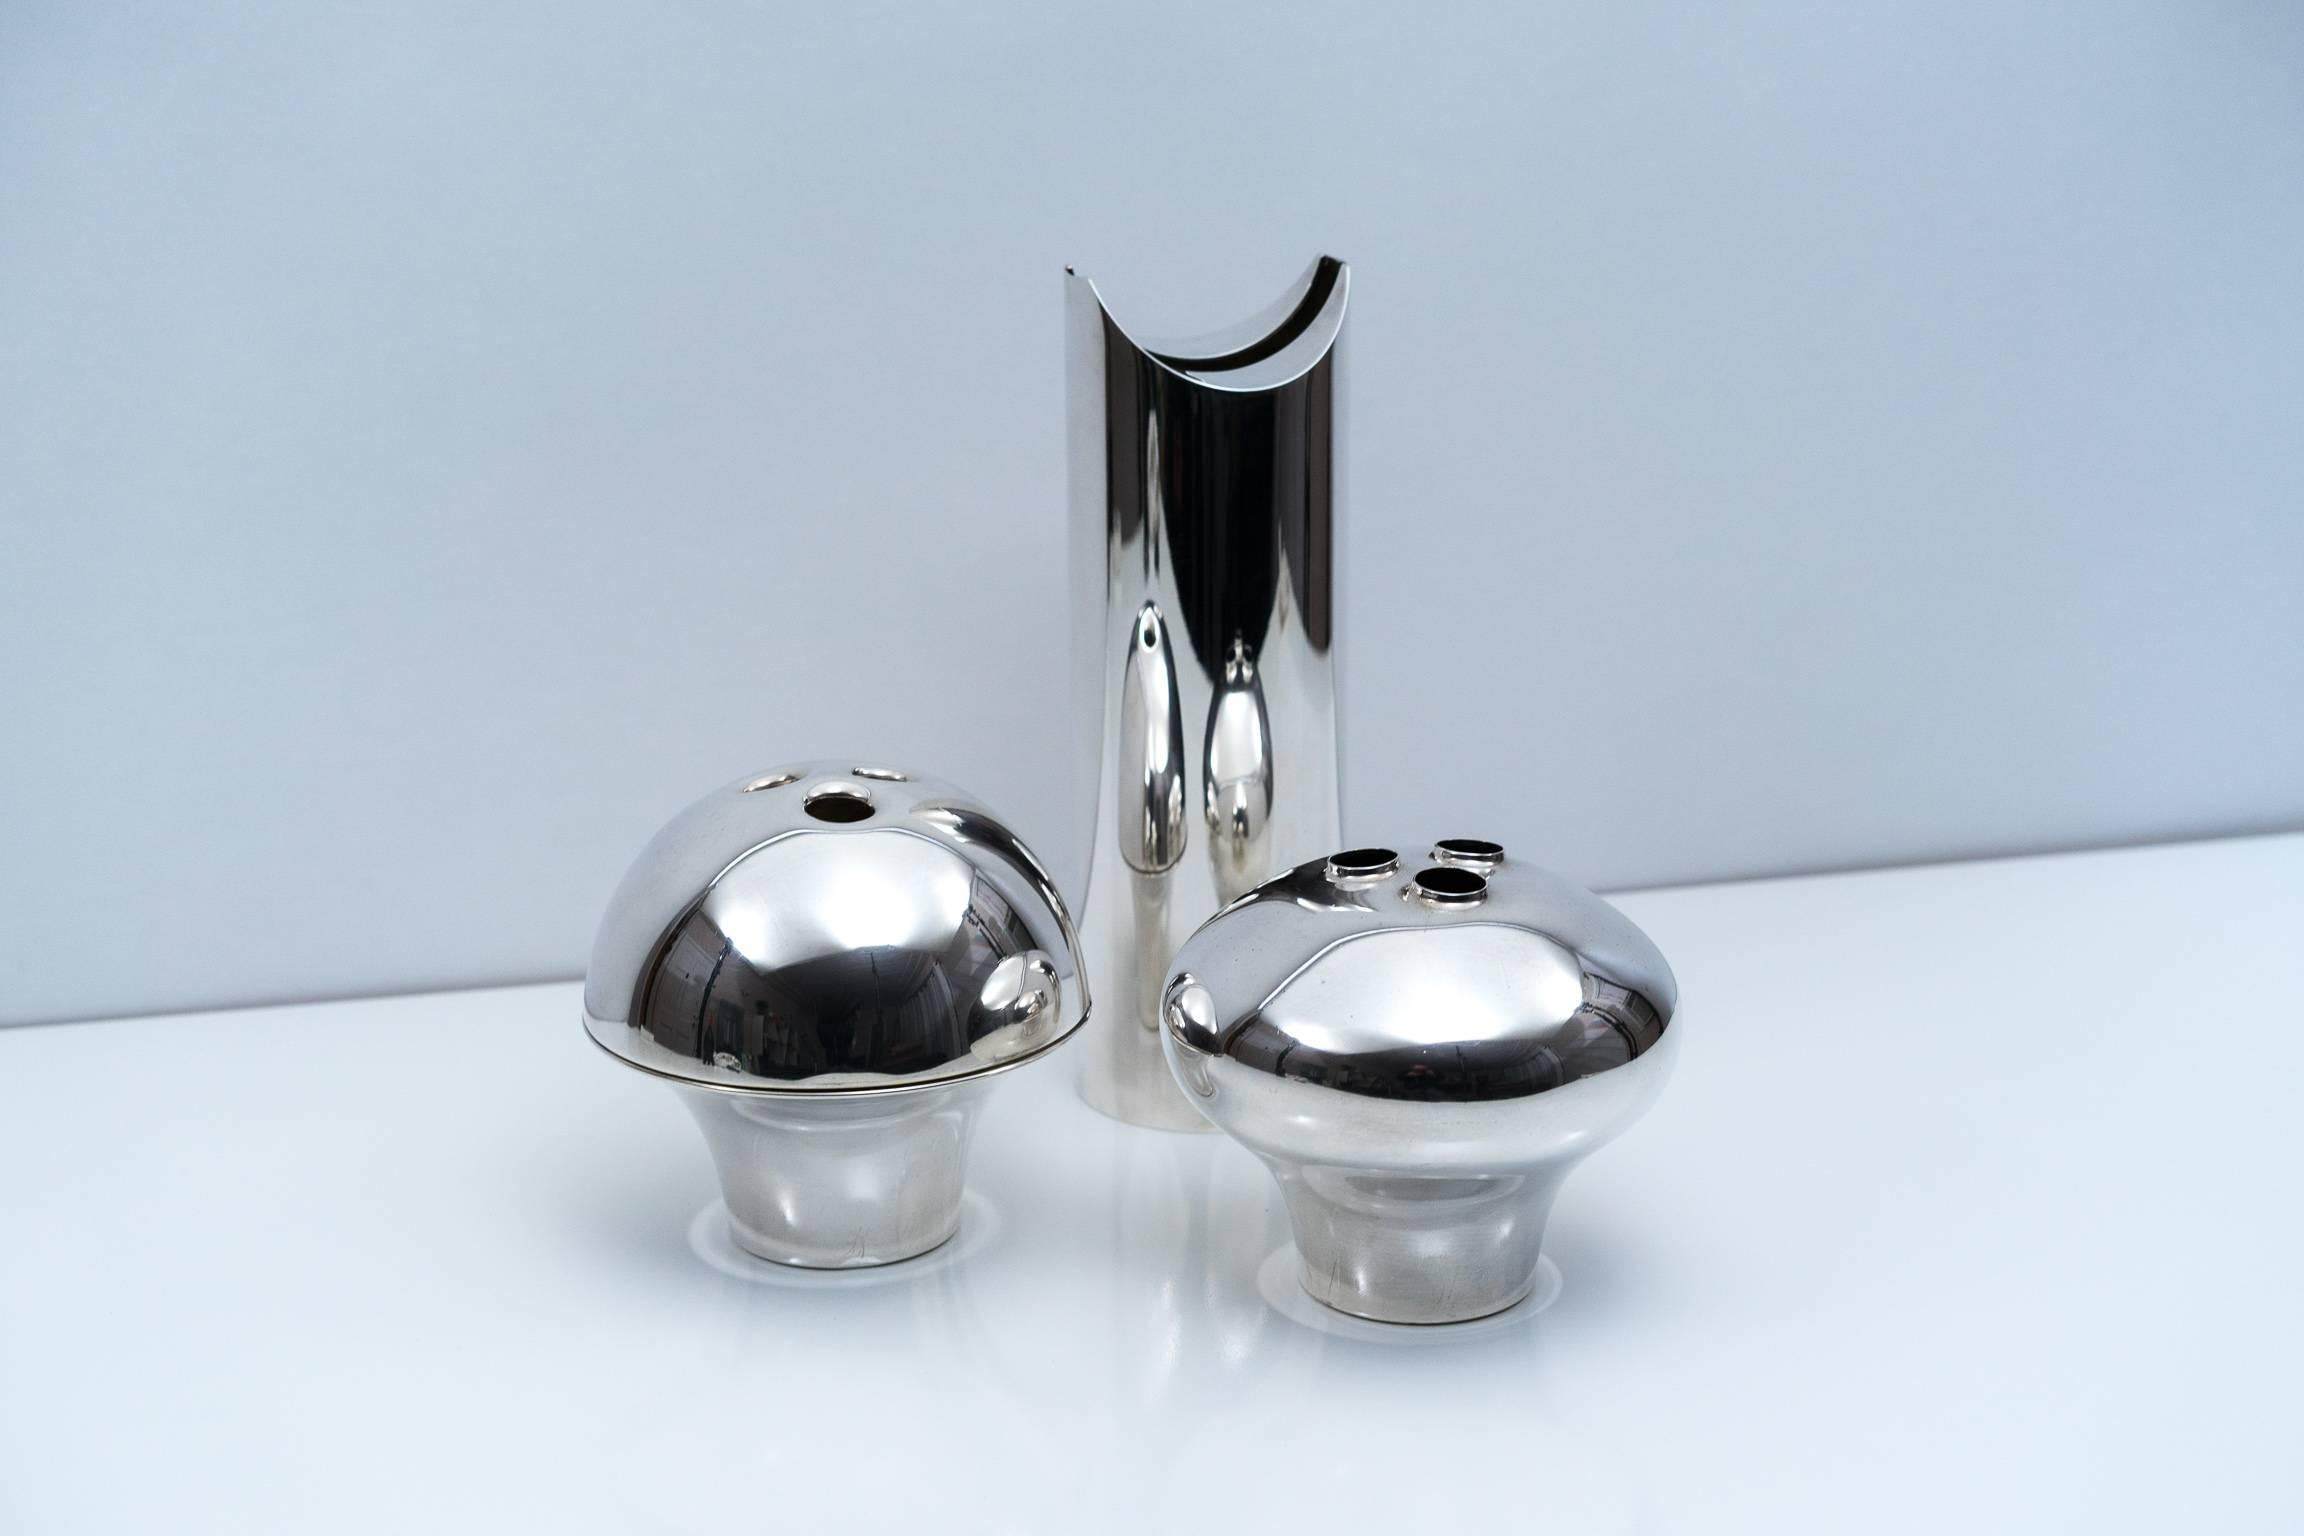 Stunning grouping of three silver plated pieces designed by Lino Sabattini for his eponymous firm. The tallest vase, 